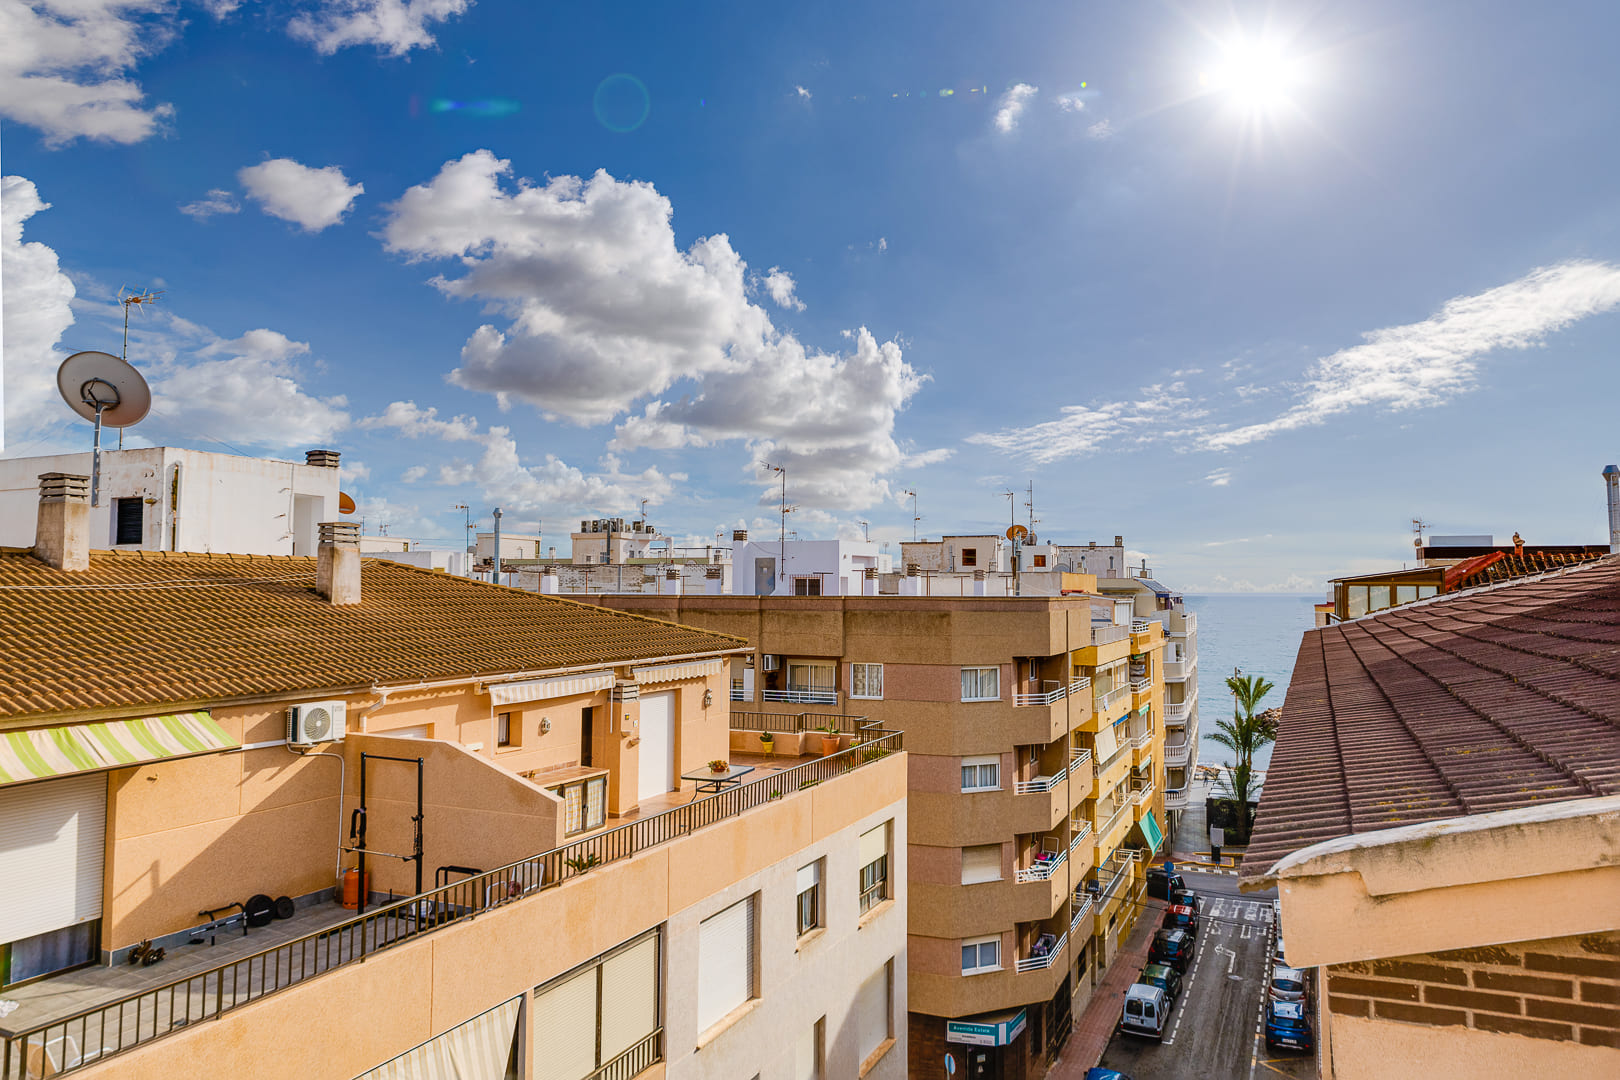 Penthouse for sale in the center of Torrevieja near the beaches and promenade.